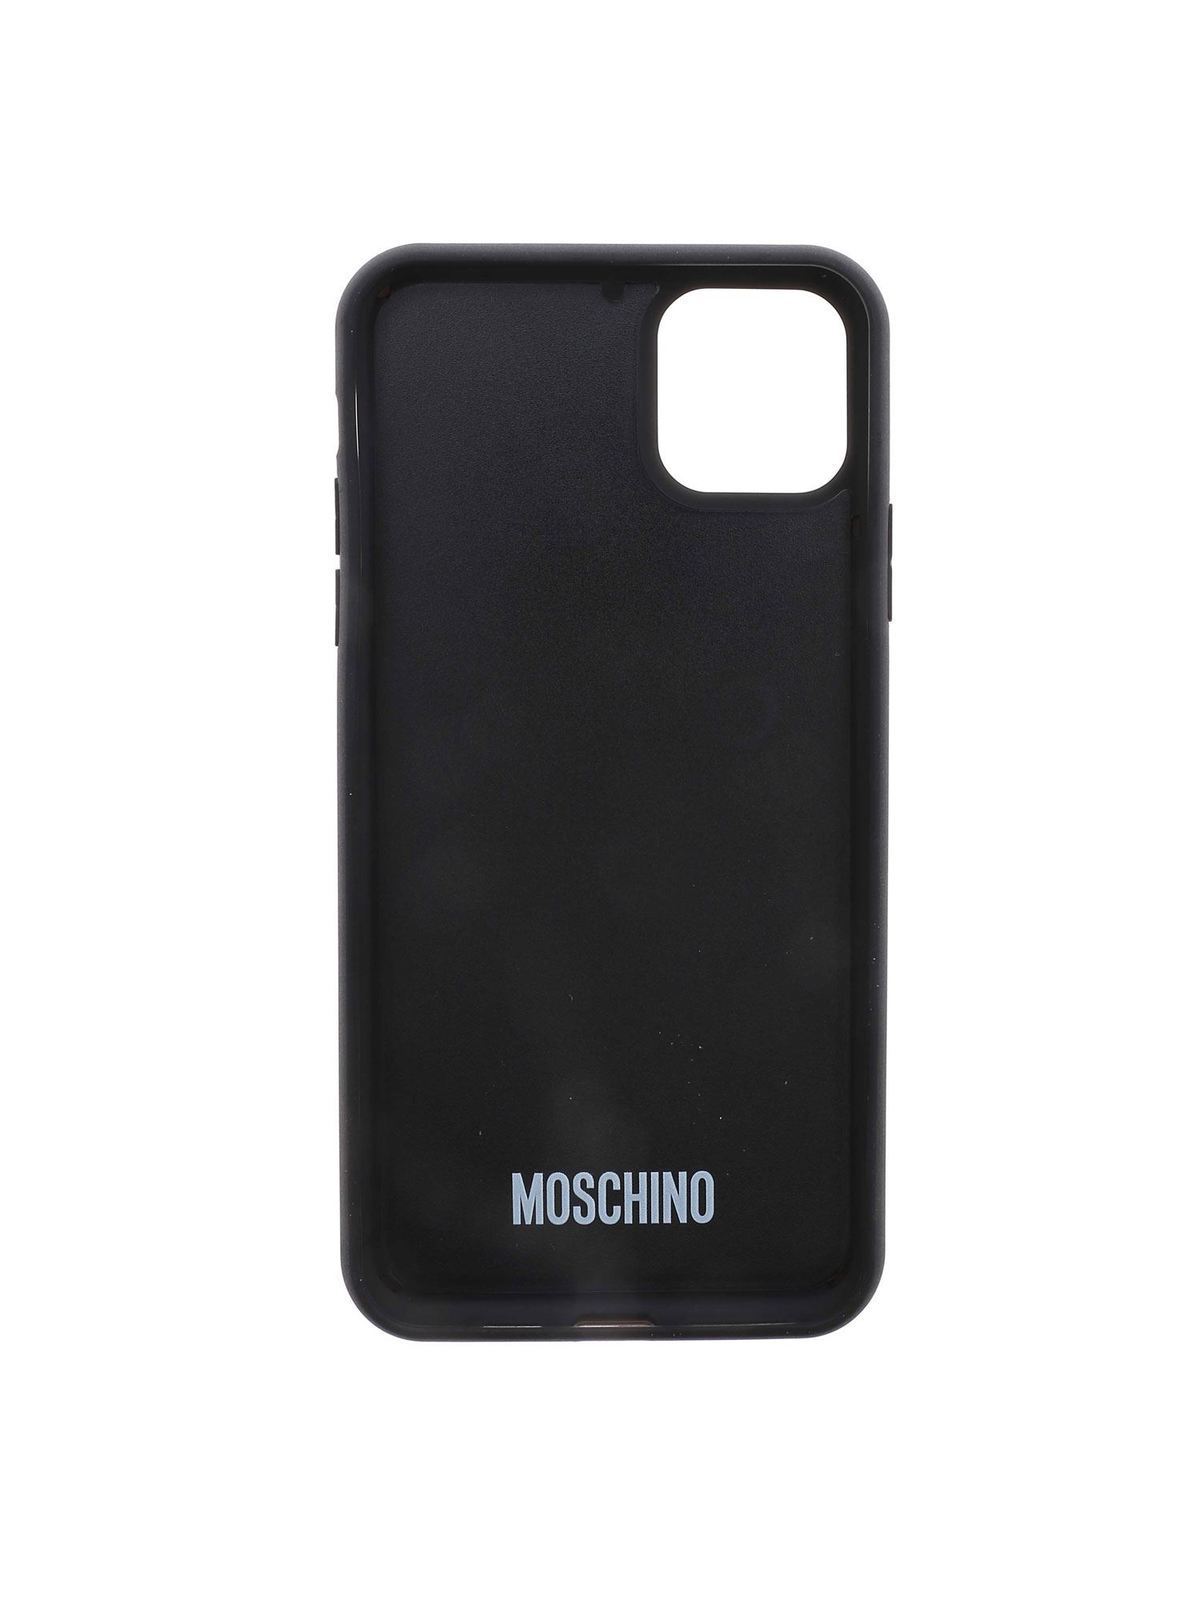 Moschino - Italian Slogan Iphone 11 Pro Max cover - Cases & Covers ...